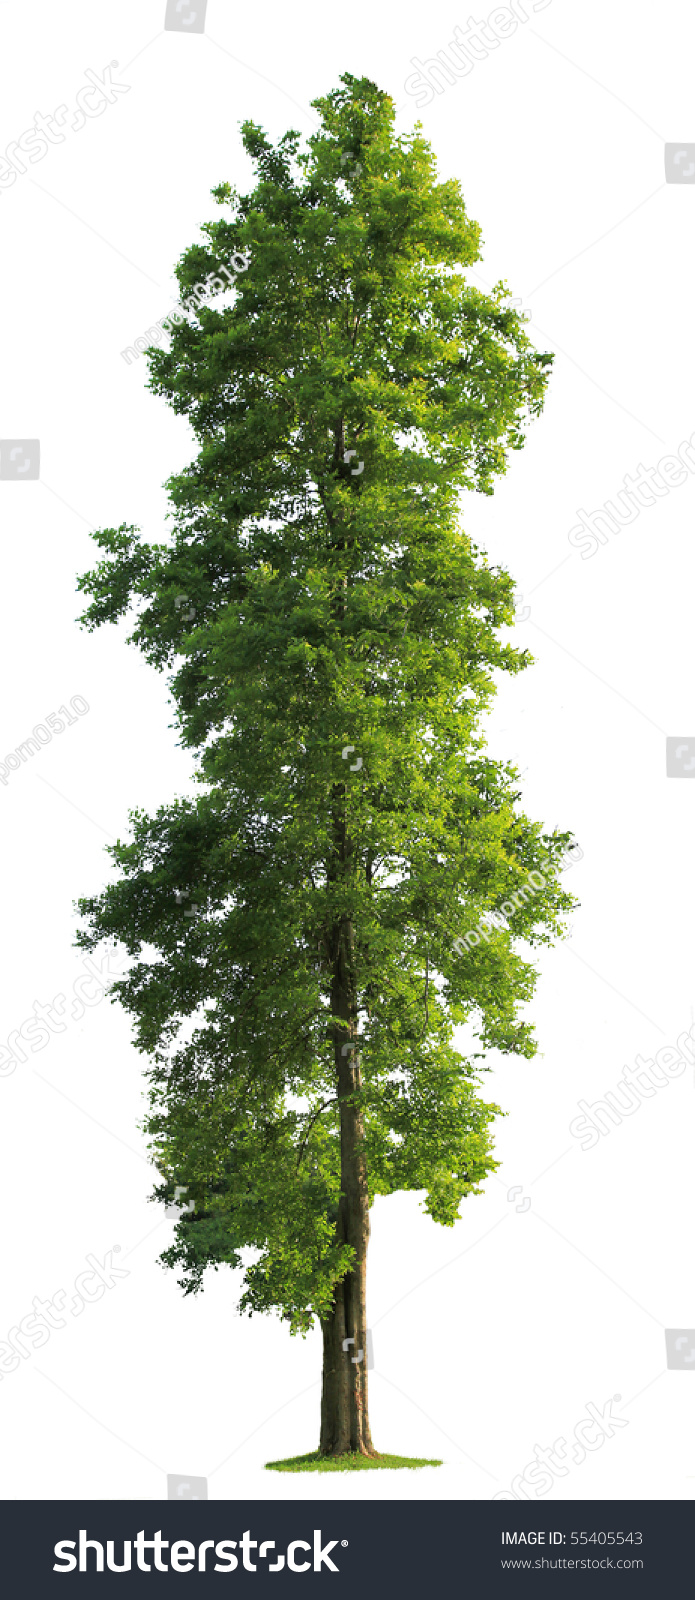 Green Tree isolated against a white background #55405543